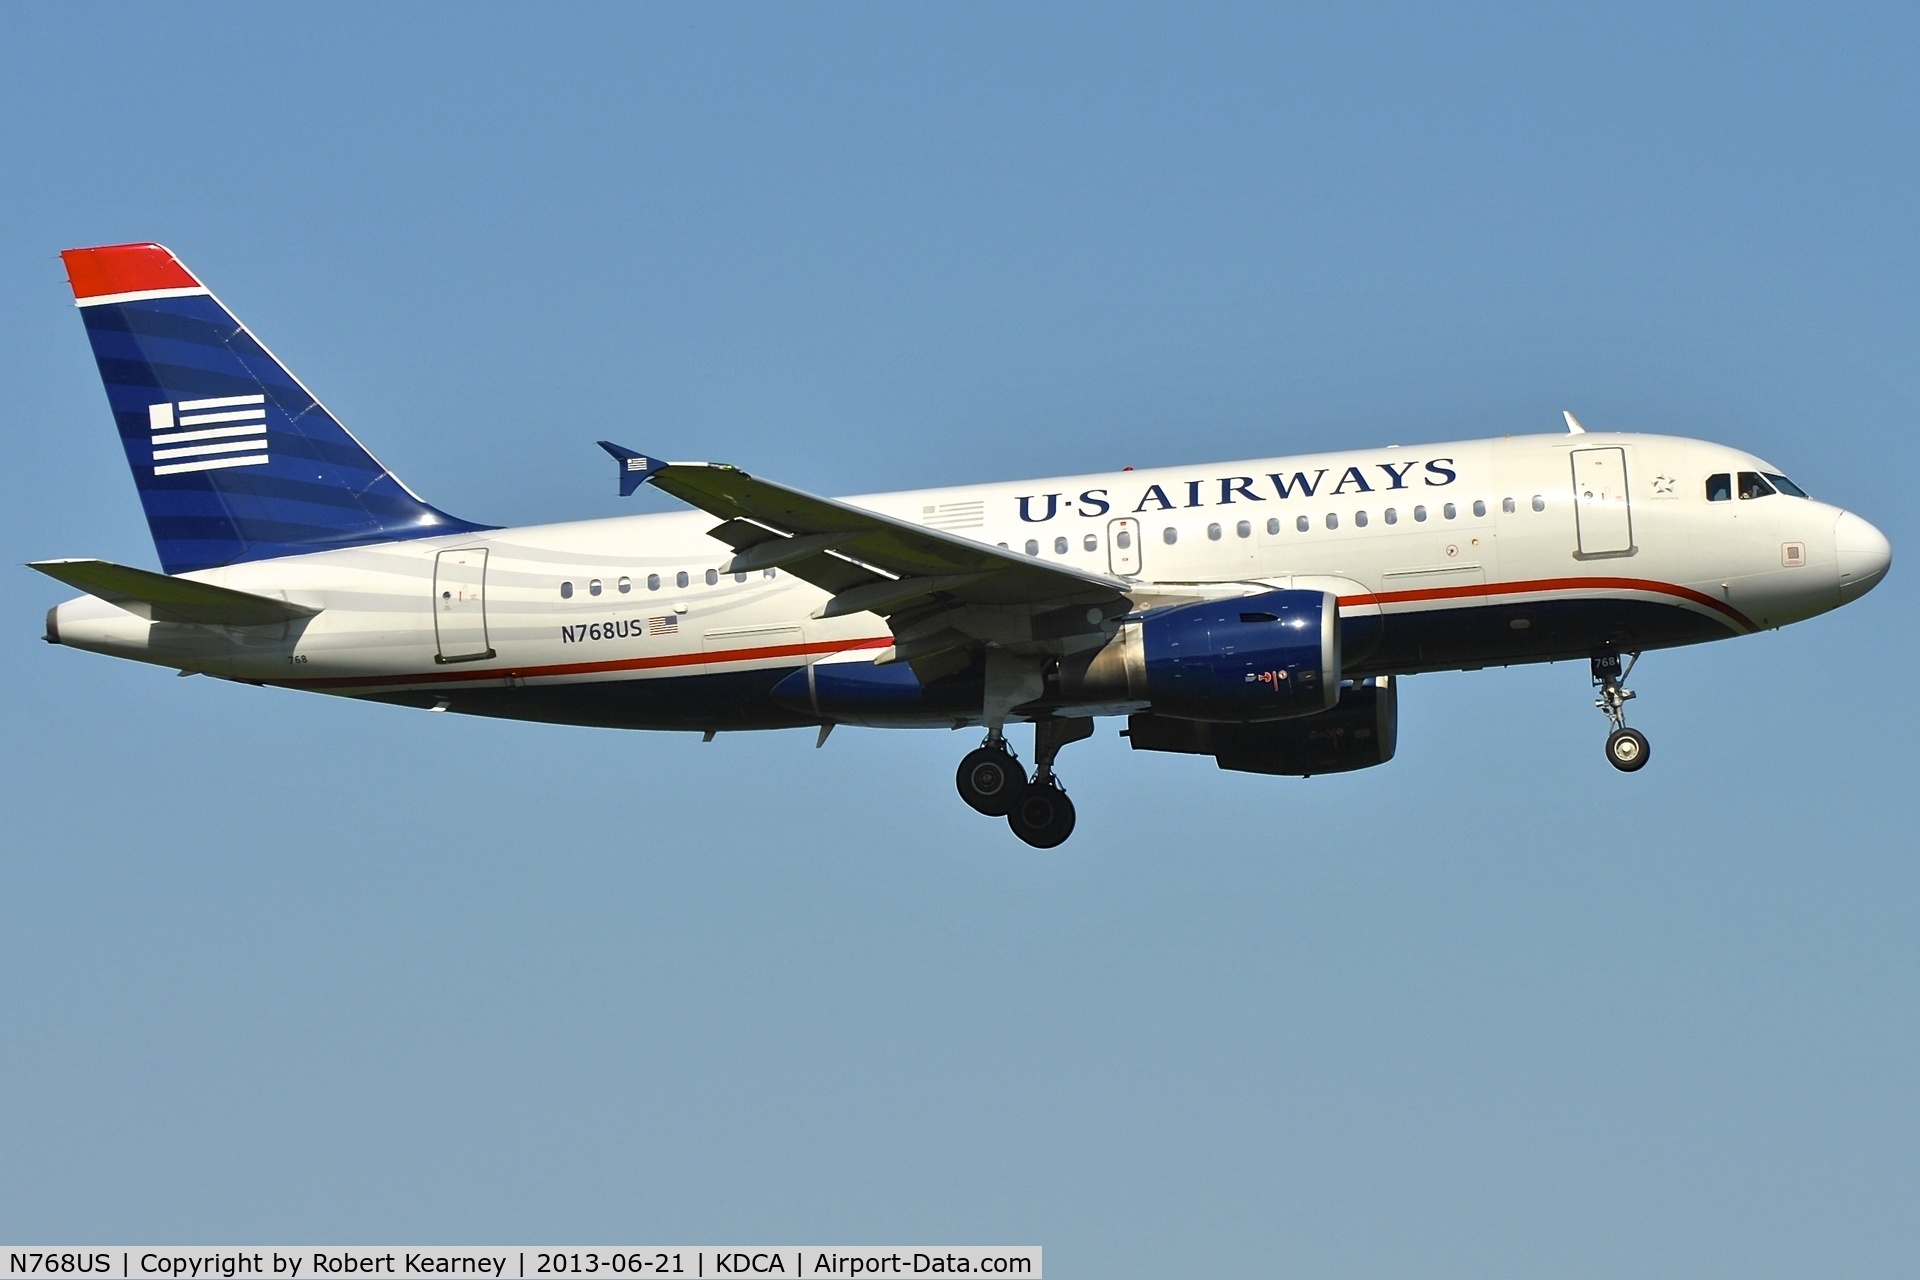 N768US, 2000 Airbus A319-112 C/N 1389, On short finals for r/w 19